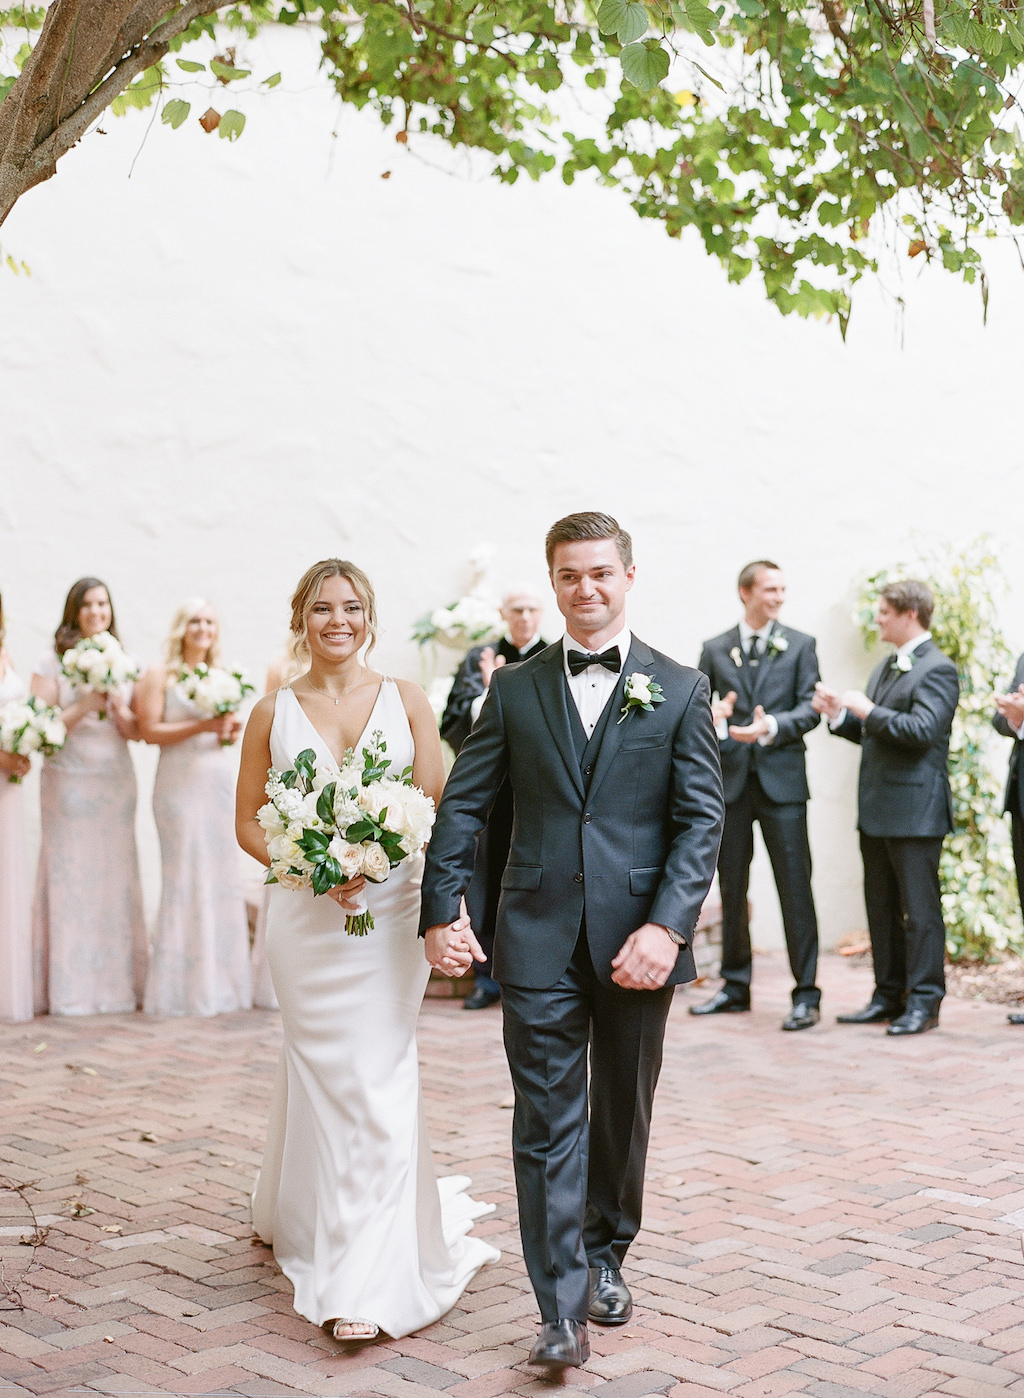 Tampa Bay Bride and Groom Wedding Exit Portrait, Bride Holding Garden Inspired Classic White, Ivory, Blush Pink and Greenery Floral Bouquet